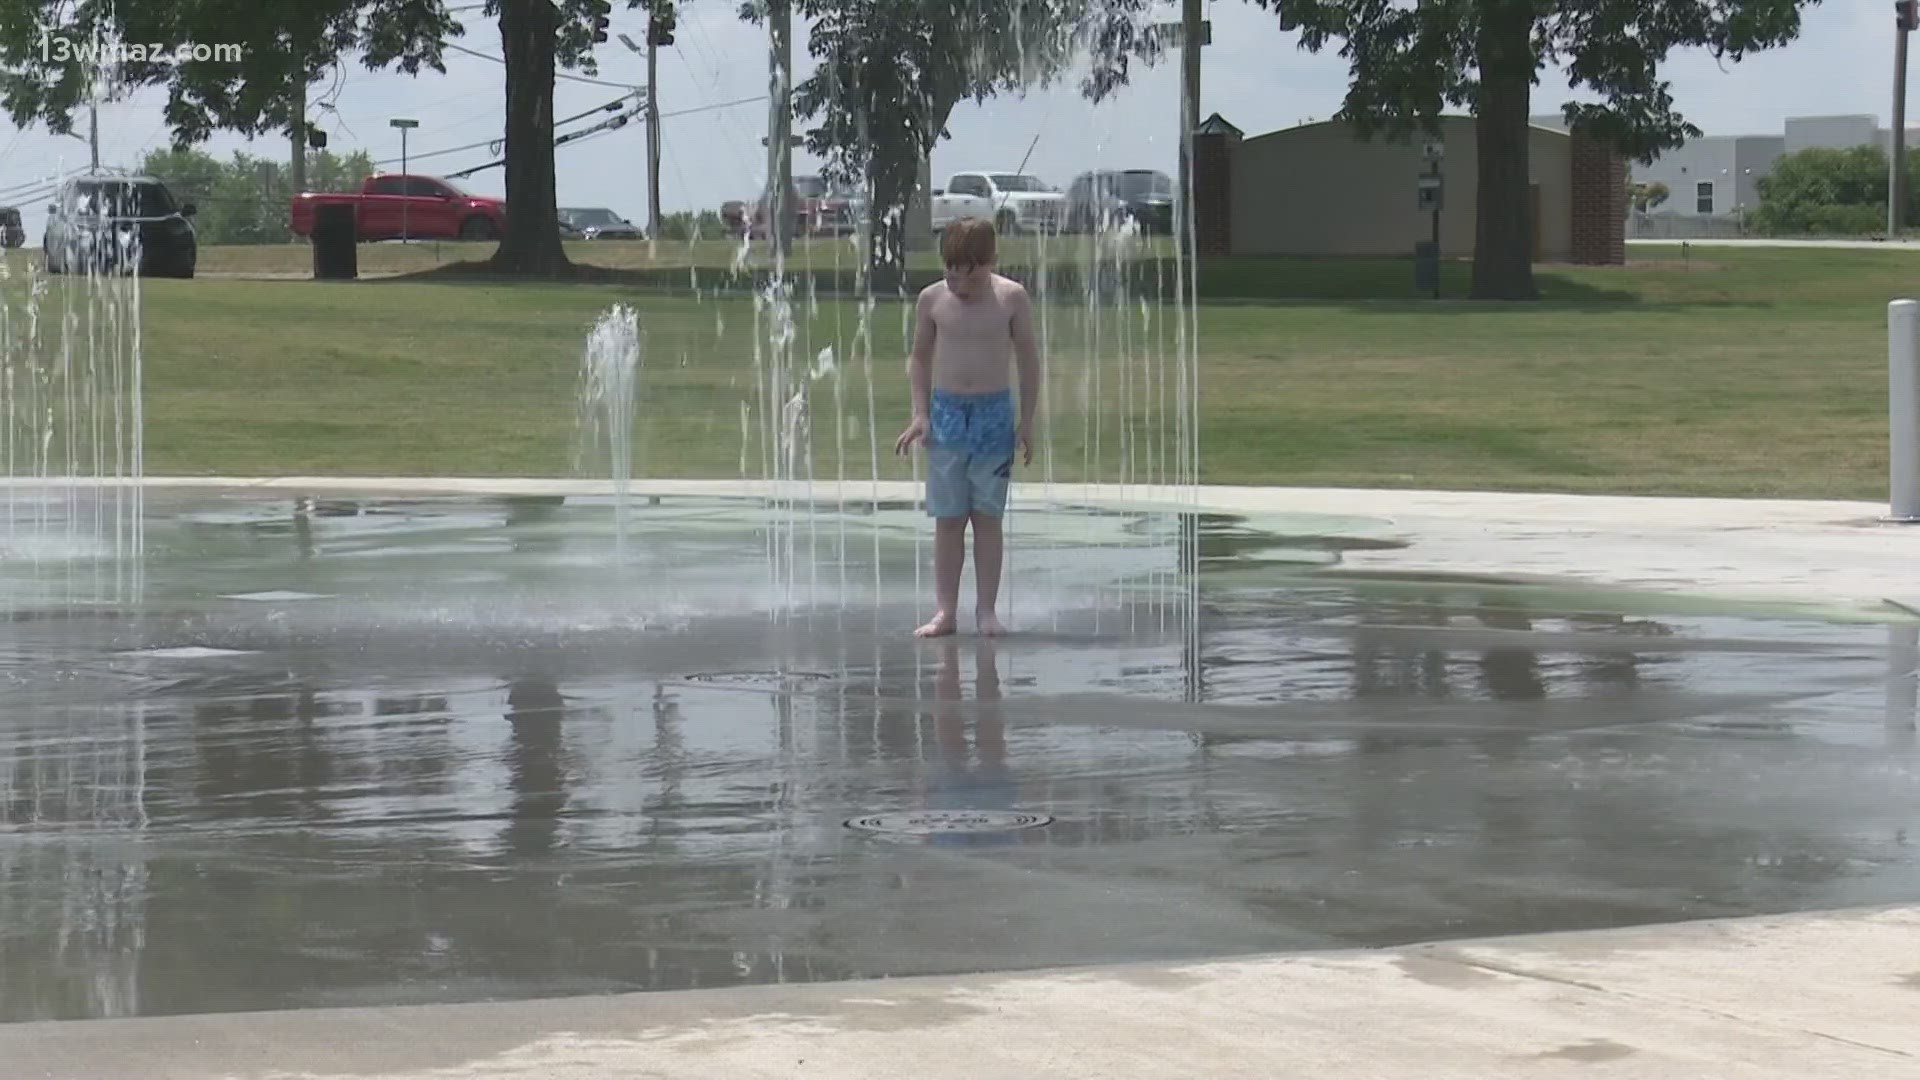 No matter which park you take your kids to this summer, the CDC has several recommendations to make sure your kid has a healthy splash.